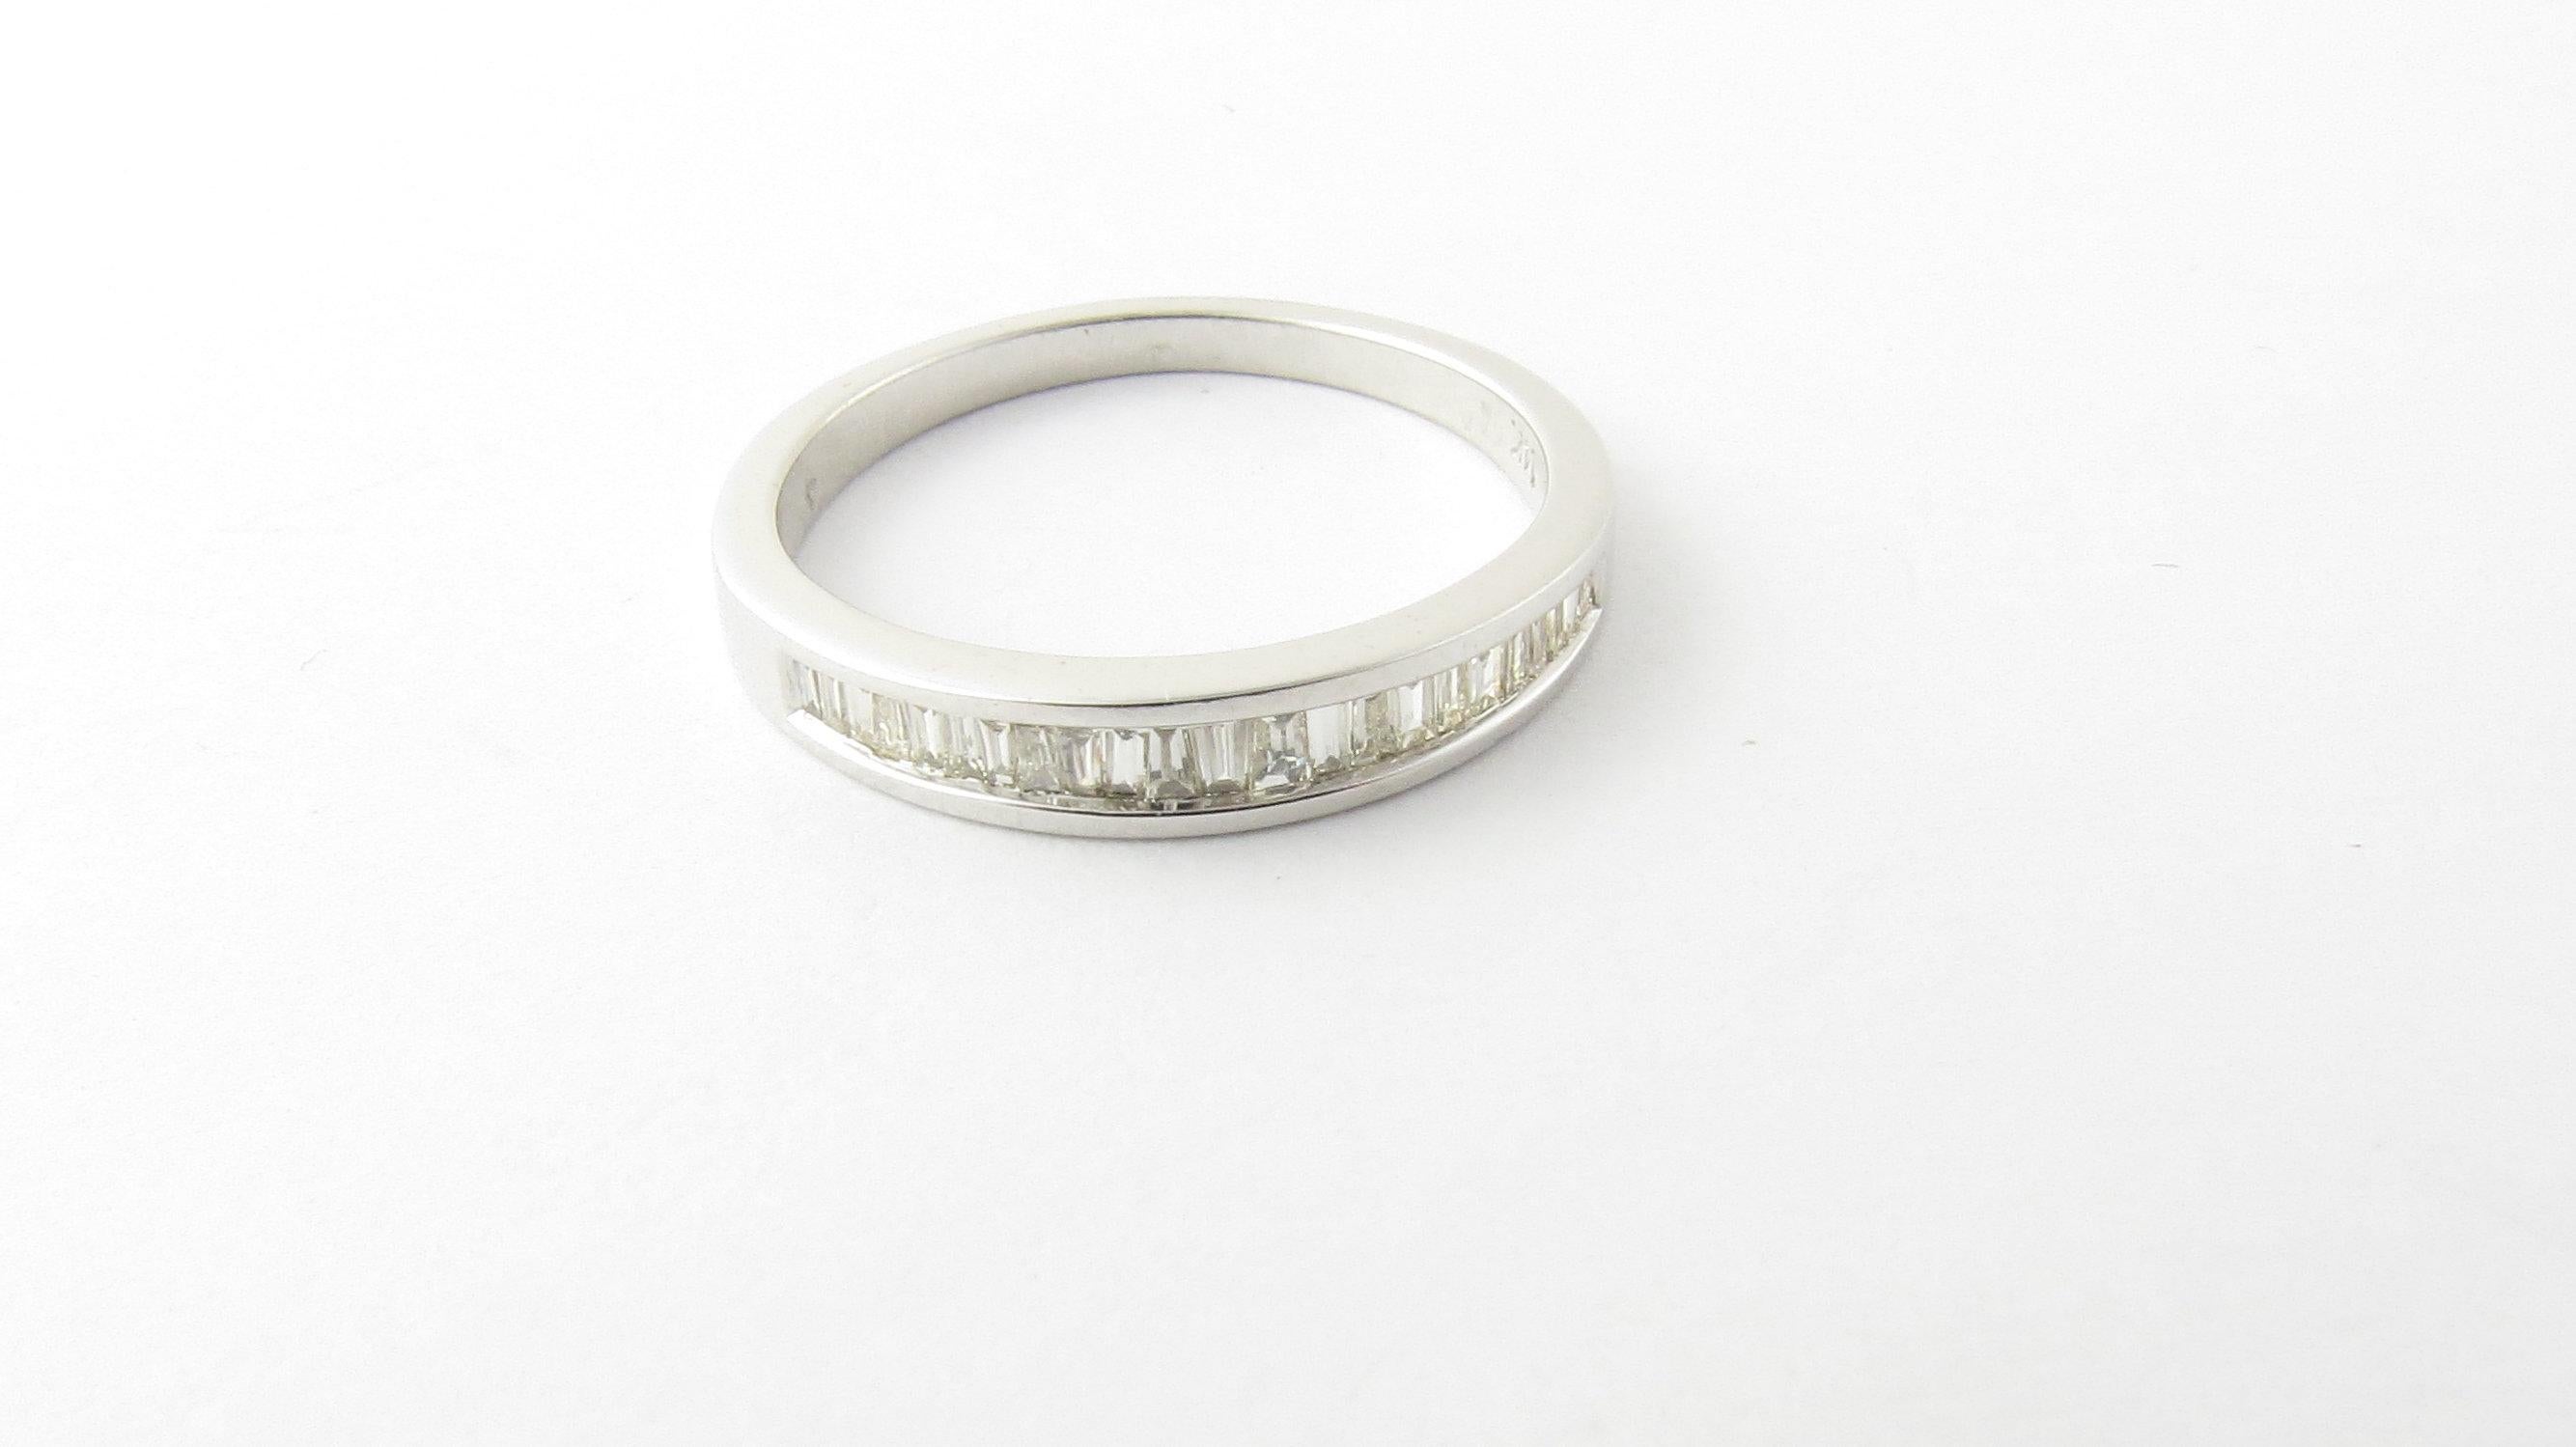 Vintage 14 Karat White Gold Baguette Diamond Wedding Band Ring Size: 6.25. This sparkling band features 22 baguette cut diamonds set in classic 14K white gold. Shank measures 2 mm. 
Approximate total diamond weight: .44 ct. Diamond color: H. Diamond